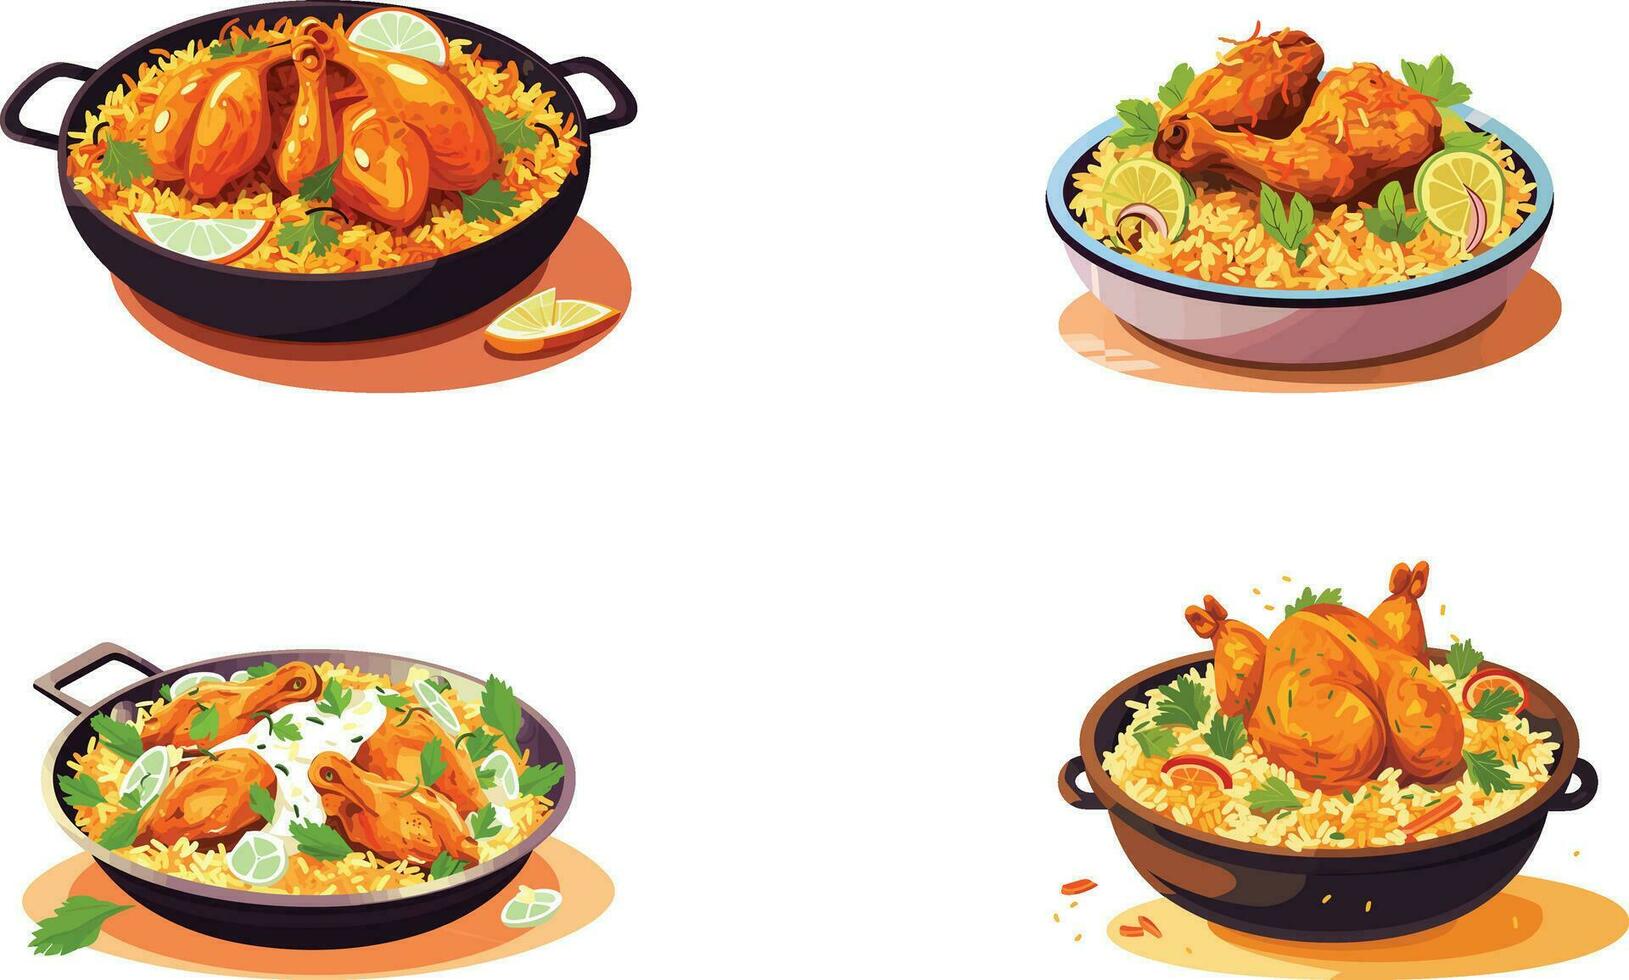 set of hot and spicy chicken biryani with roasted pieces and lemon illustration on isolated white background vector